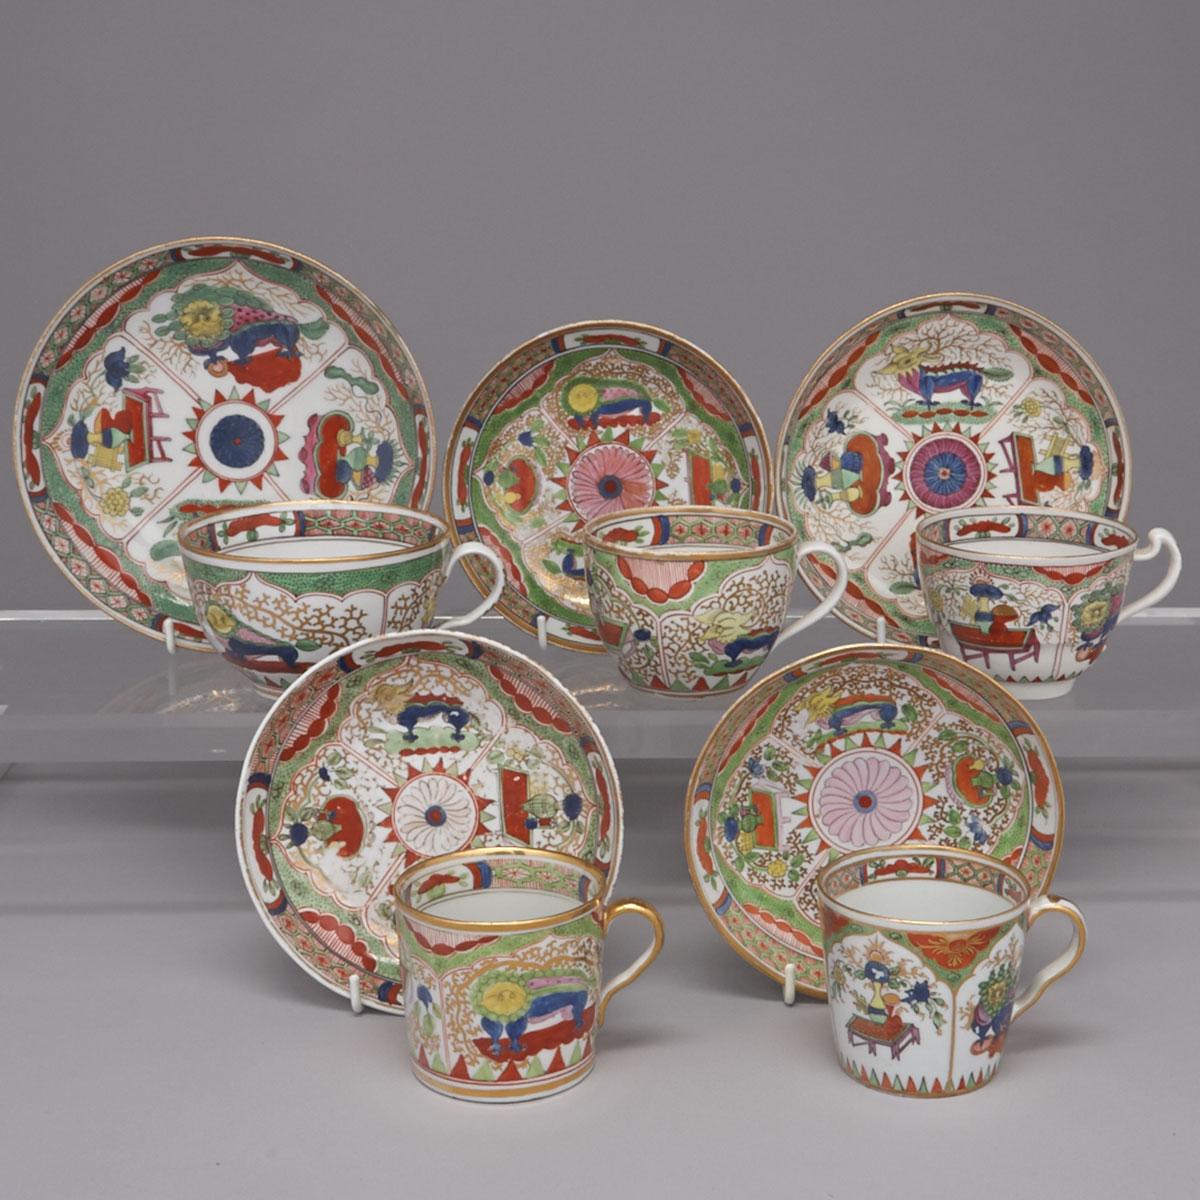 Five Various English Porcelain ‘Bengal Tiger’ or ‘Dragon in Compartments’ Pattern Cups and Saucers, c.1800-10